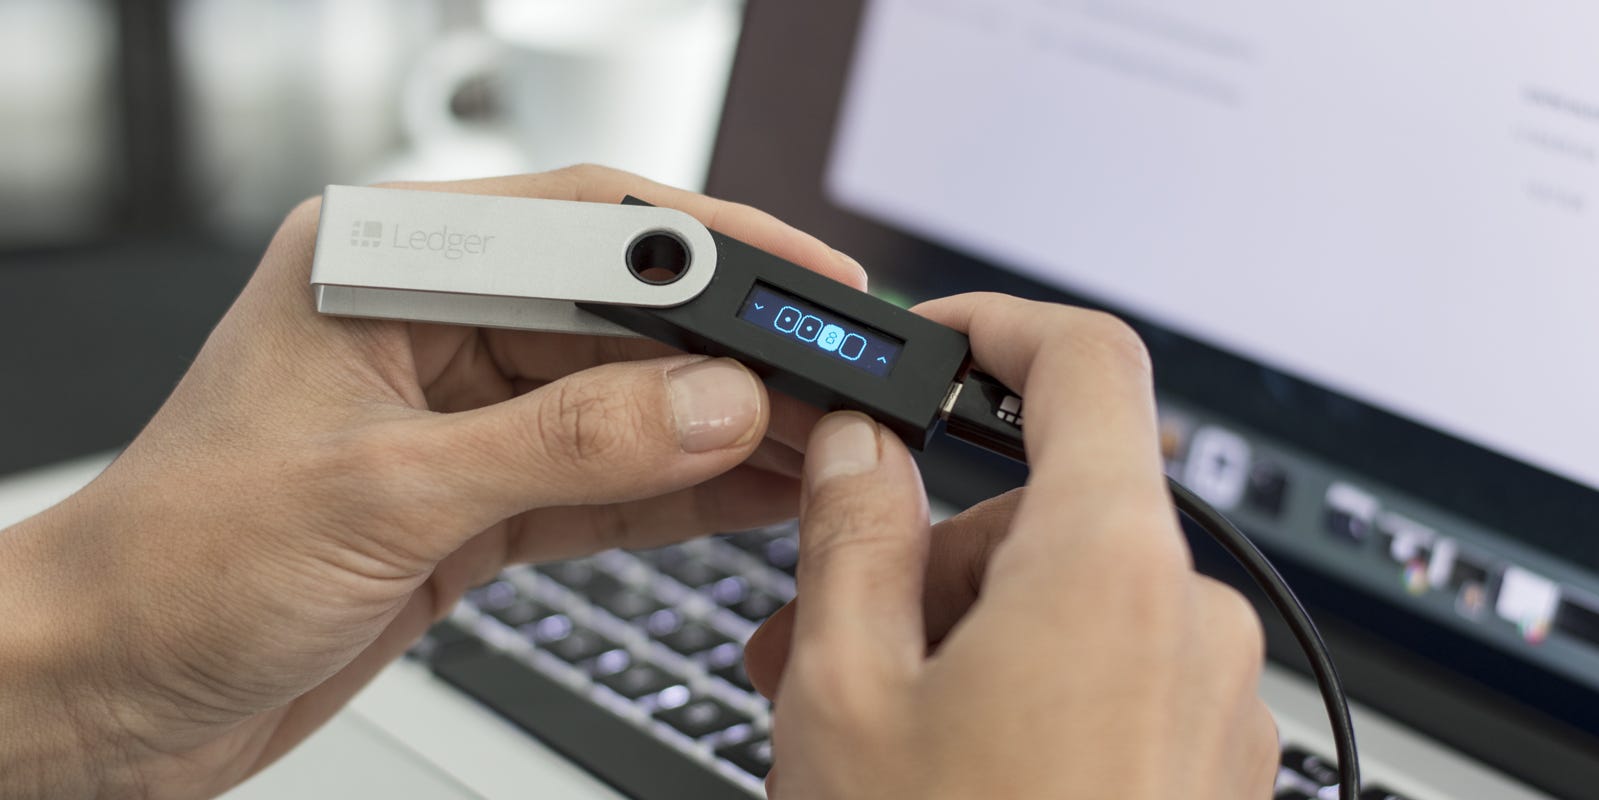 How To Get The Ledger Nano S Private Key